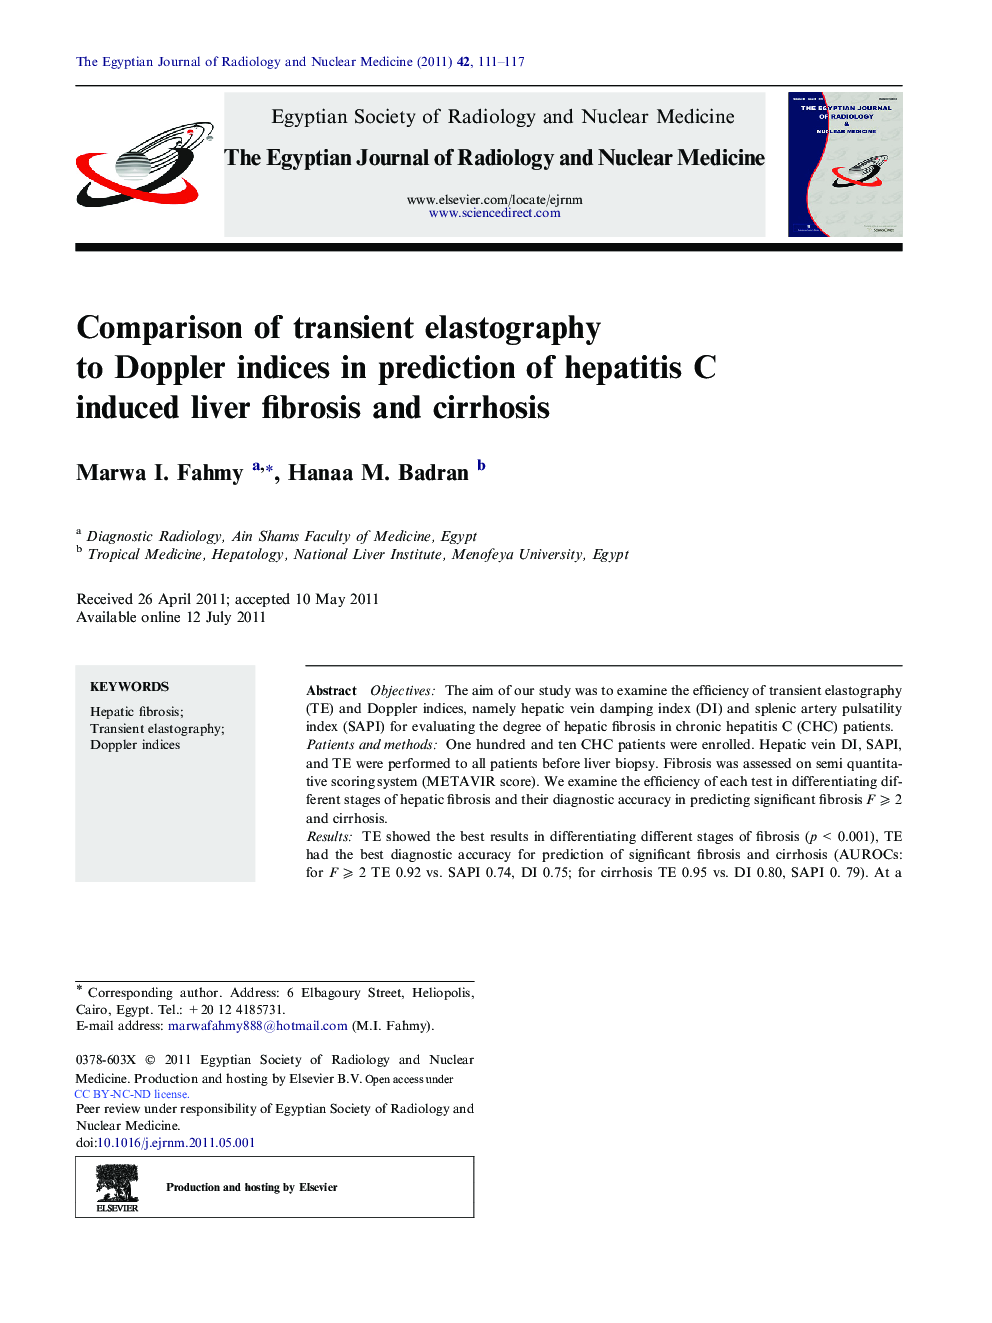 Comparison of transient elastography to Doppler indices in prediction of hepatitis C induced liver fibrosis and cirrhosis 